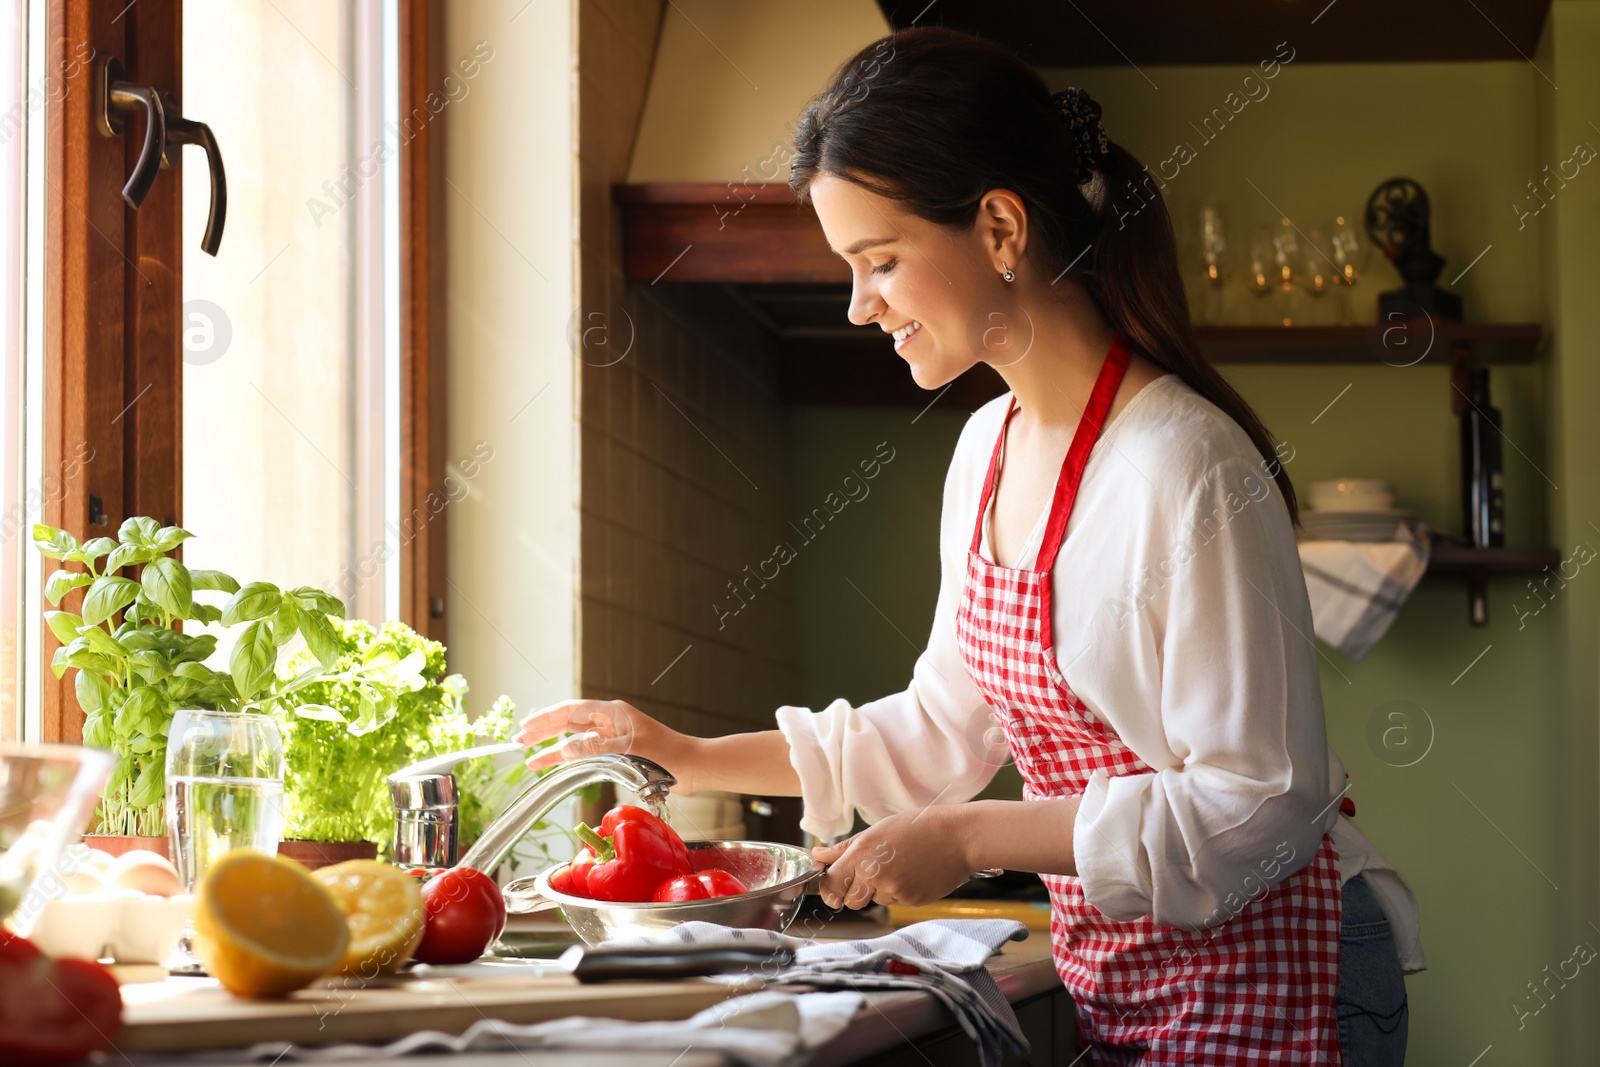 Photo of Young woman washing fresh bell peppers in kitchen sink